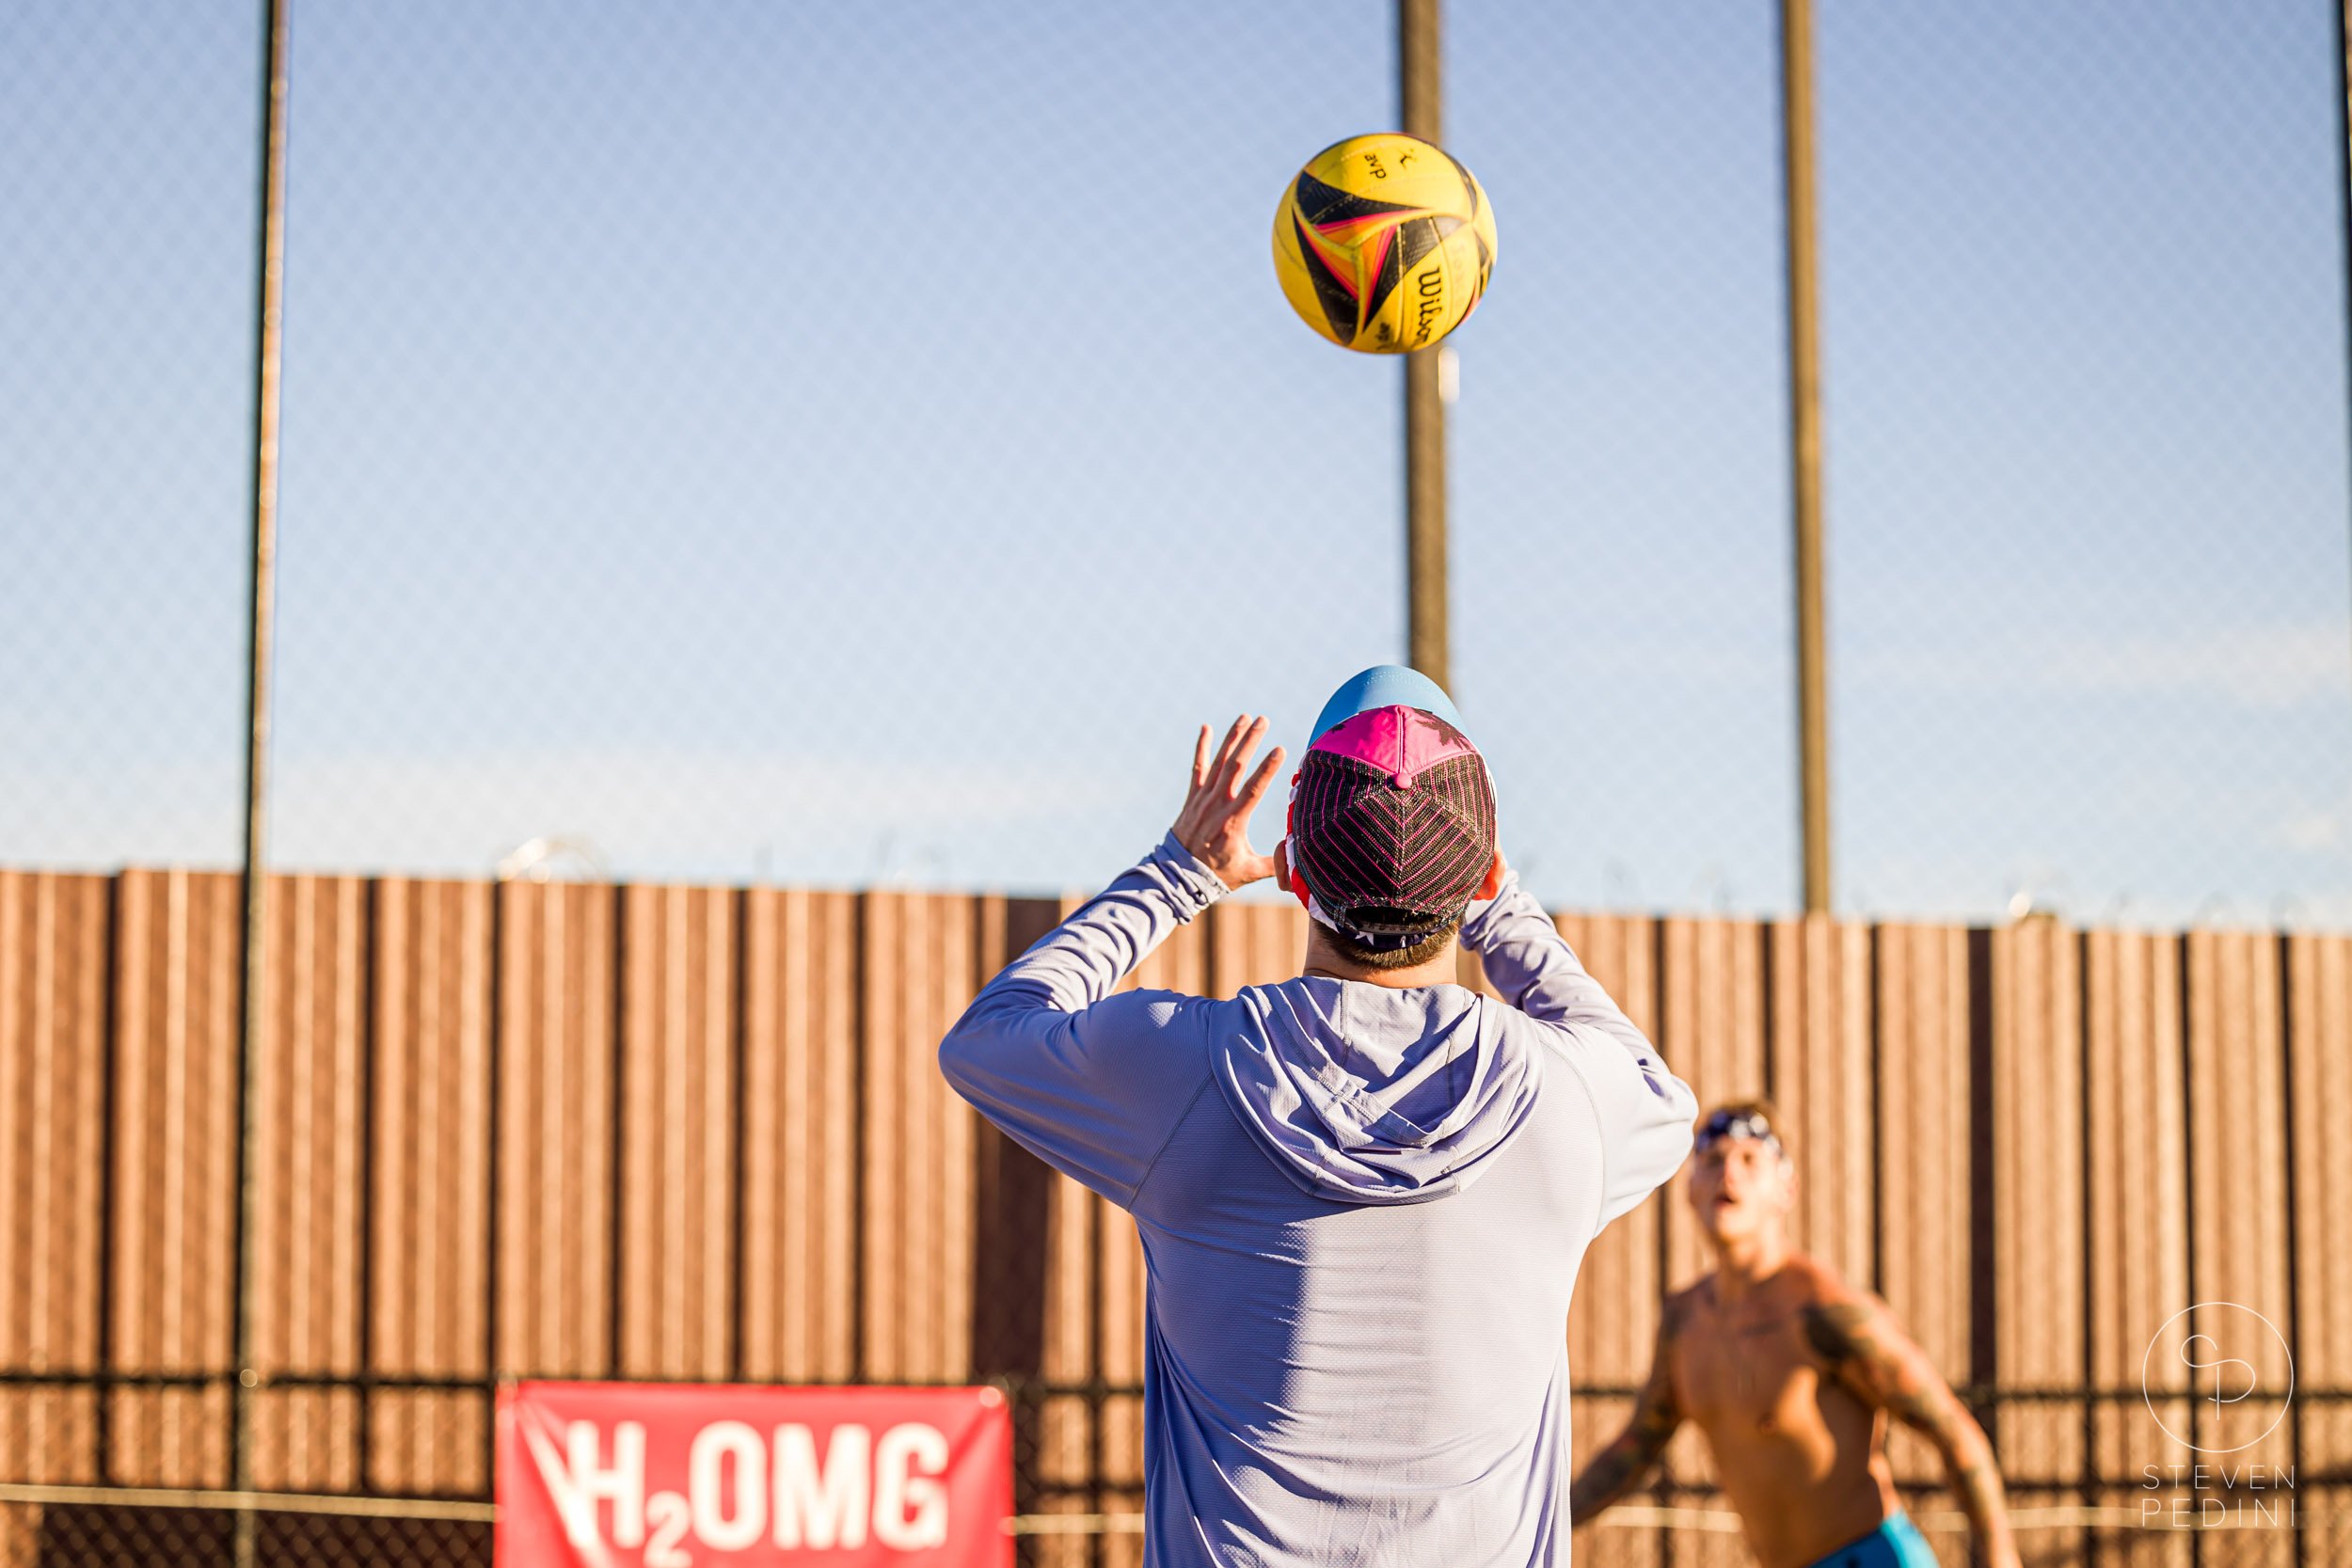 Steven Pedini Photography - Bumpy Pickle - Sand Volleyball - Houston TX - World Cup of Volleyball - 00120.jpg